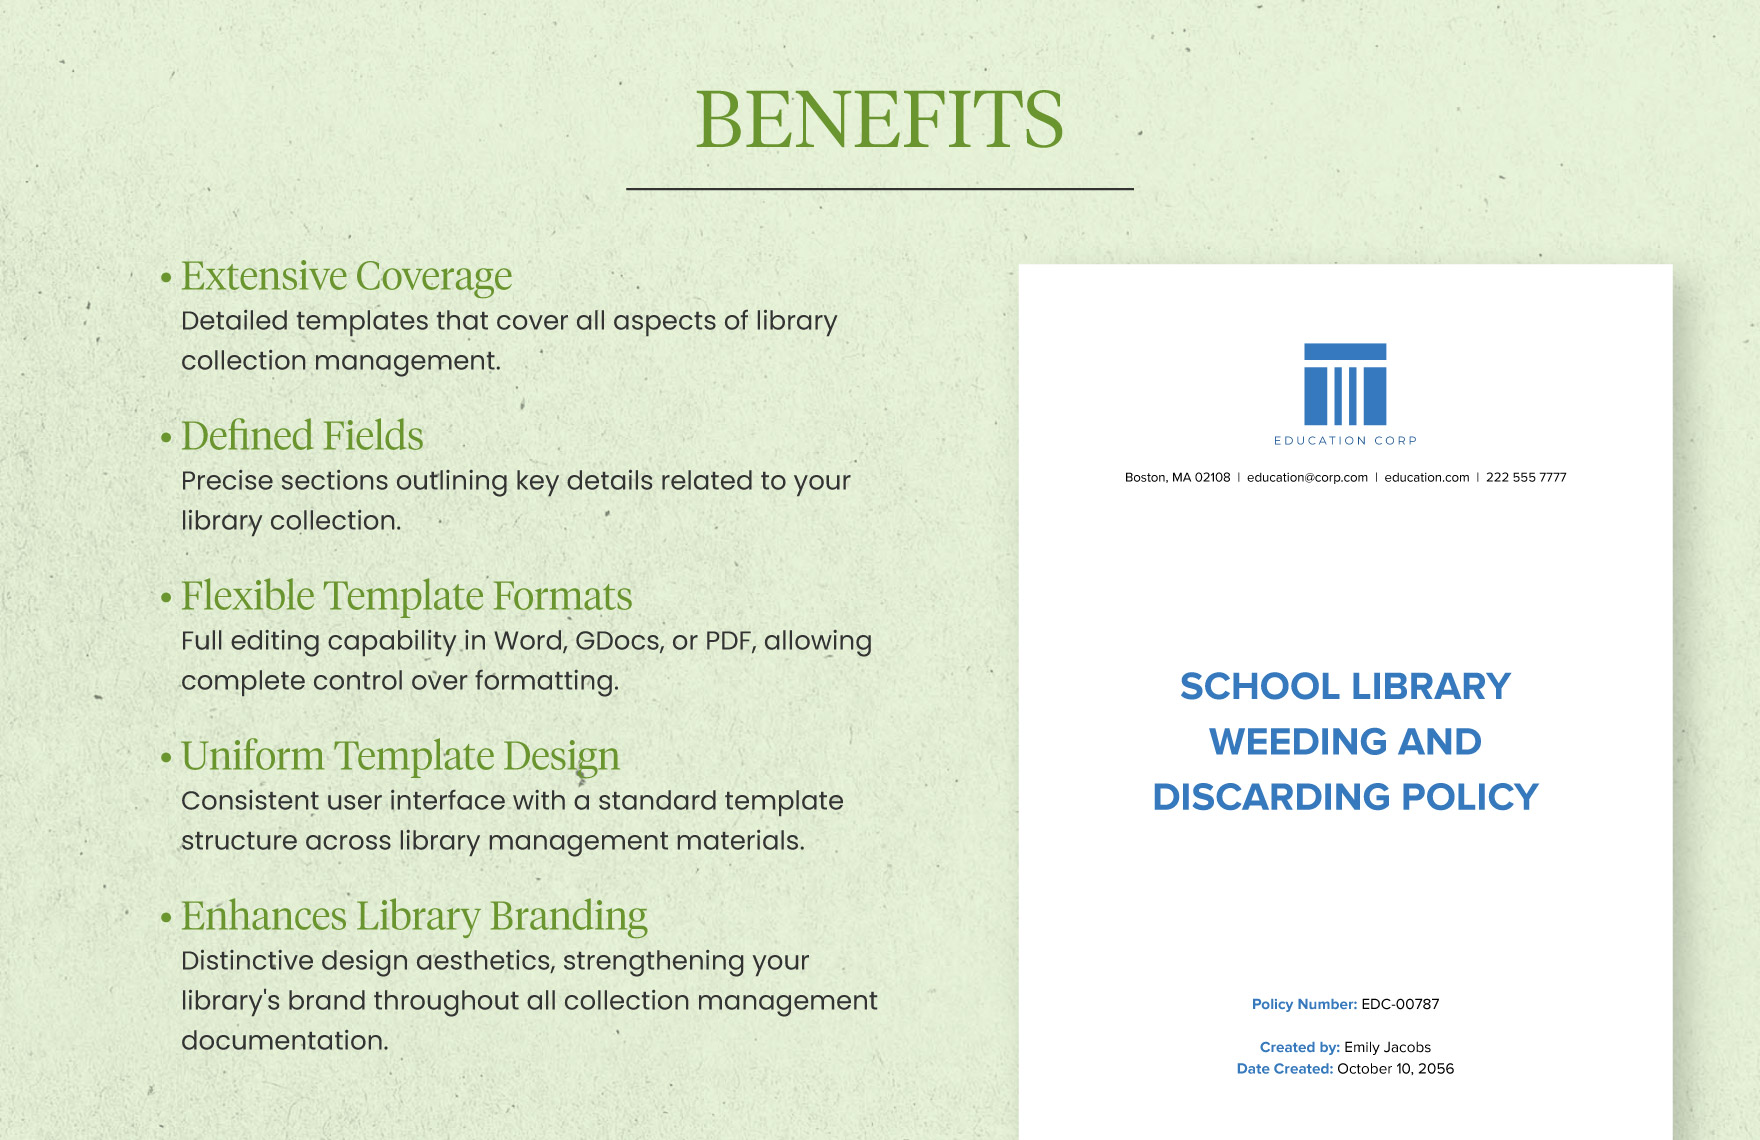 School Library Weeding and Discarding Policy Template